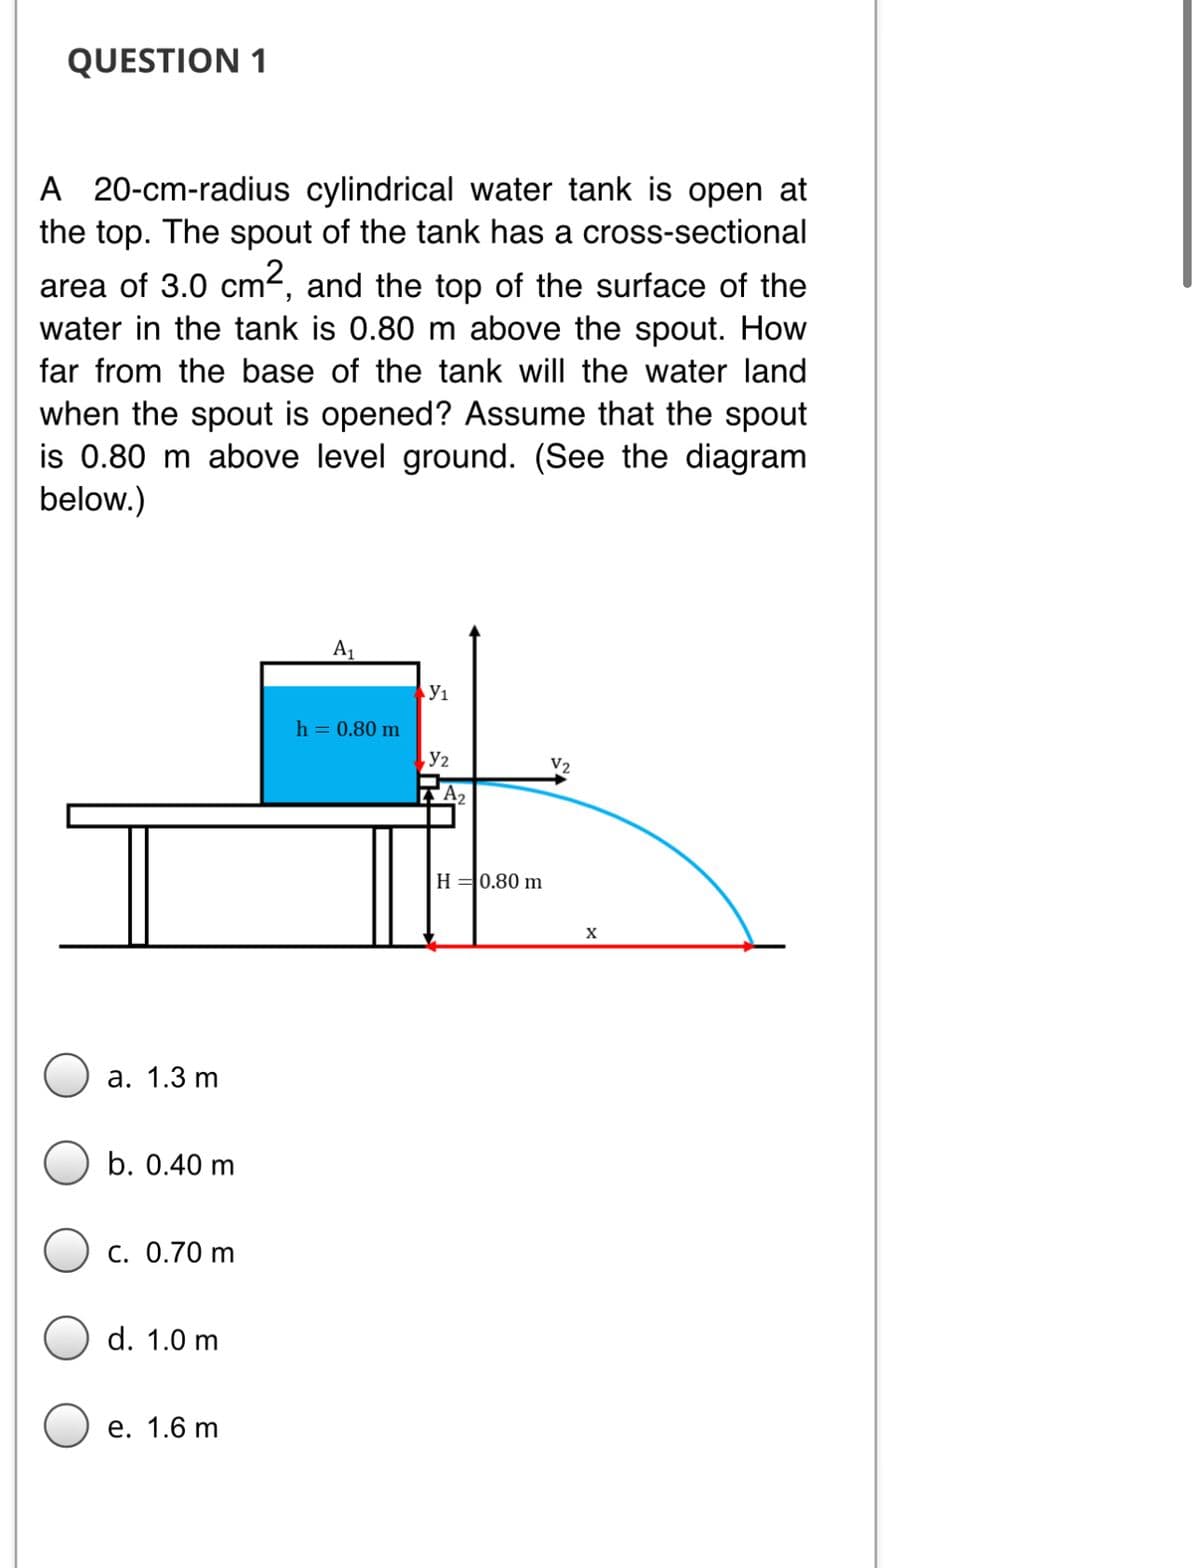 QUESTION 1
A 20-cm-radius cylindrical water tank is open at
the top. The spout of the tank has a cross-sectional
area of 3.0 cm2, and the top of the surface of the
water in the tank is 0.80 m above the spout. How
far from the base of the tank will the water land
when the spout is opened? Assume that the spout
is 0.80 m above level ground. (See the diagram
below.)
A1
h = 0.80 m
V2
A2
H =0.80 m
а. 1.3 m
b. 0.40 m
C. 0.70 m
d. 1.0 m
е. 1.6 m
